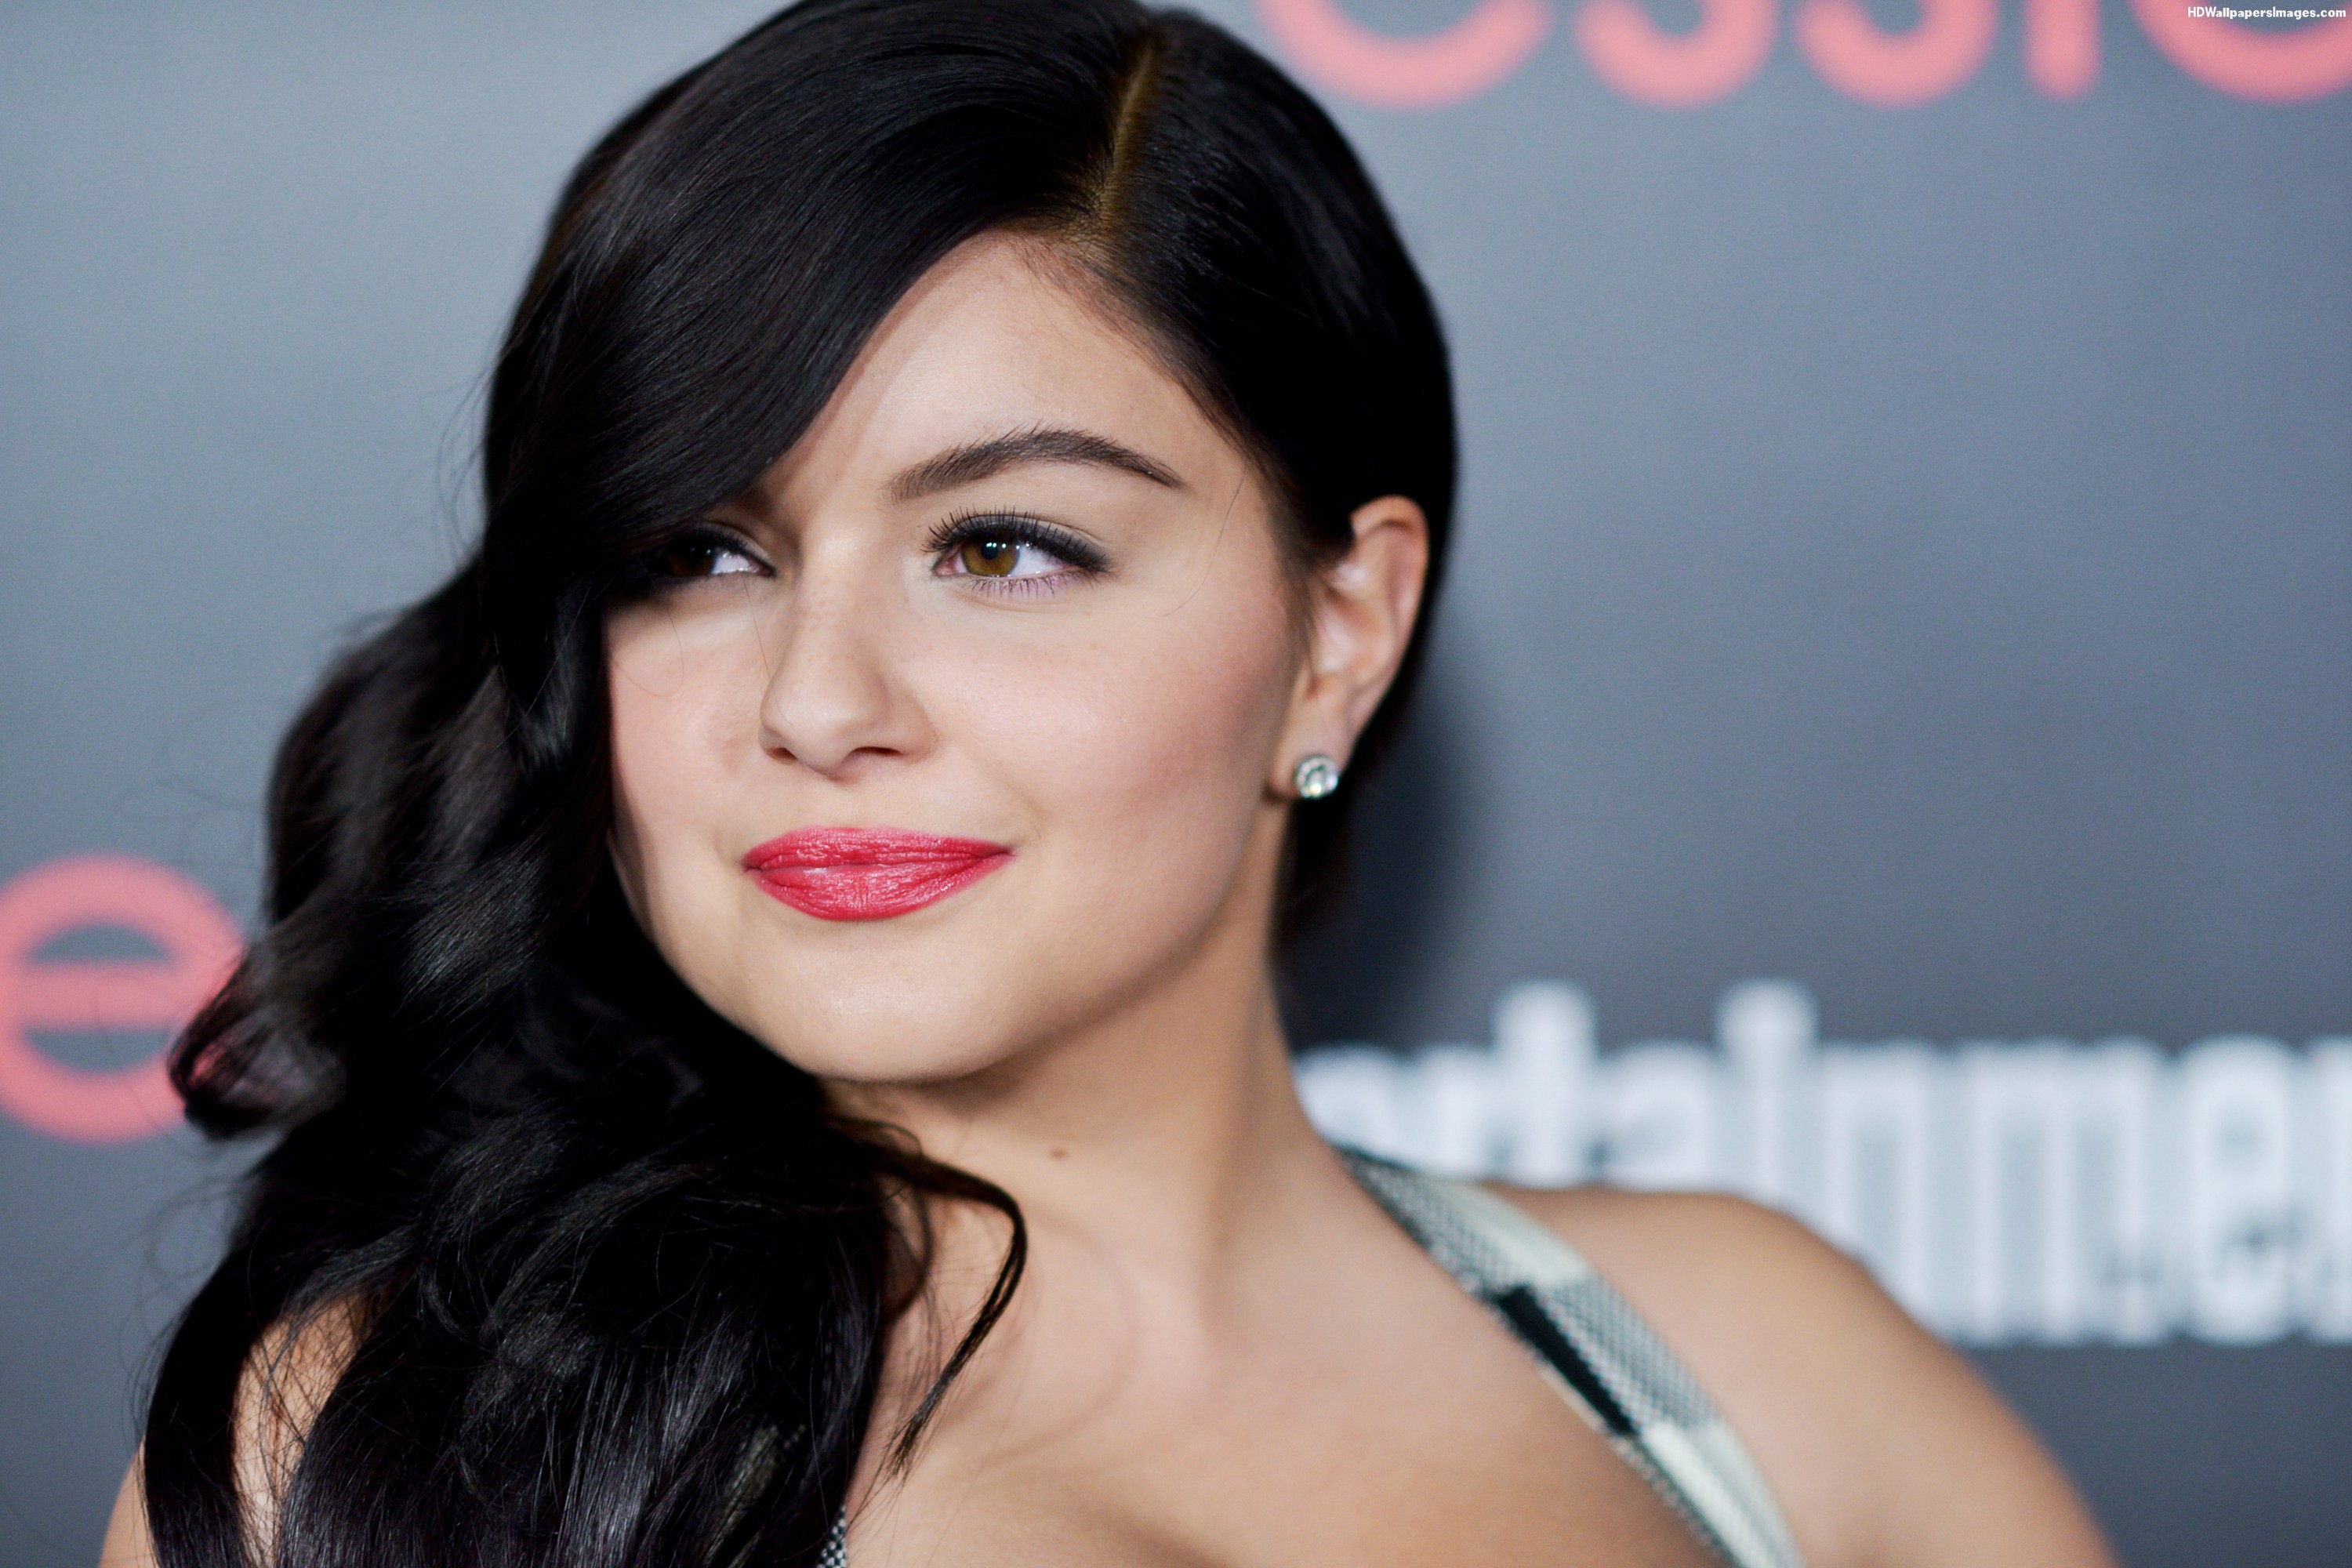 Ariel Winter Wallpapers Images Photos Pictures Backgrounds